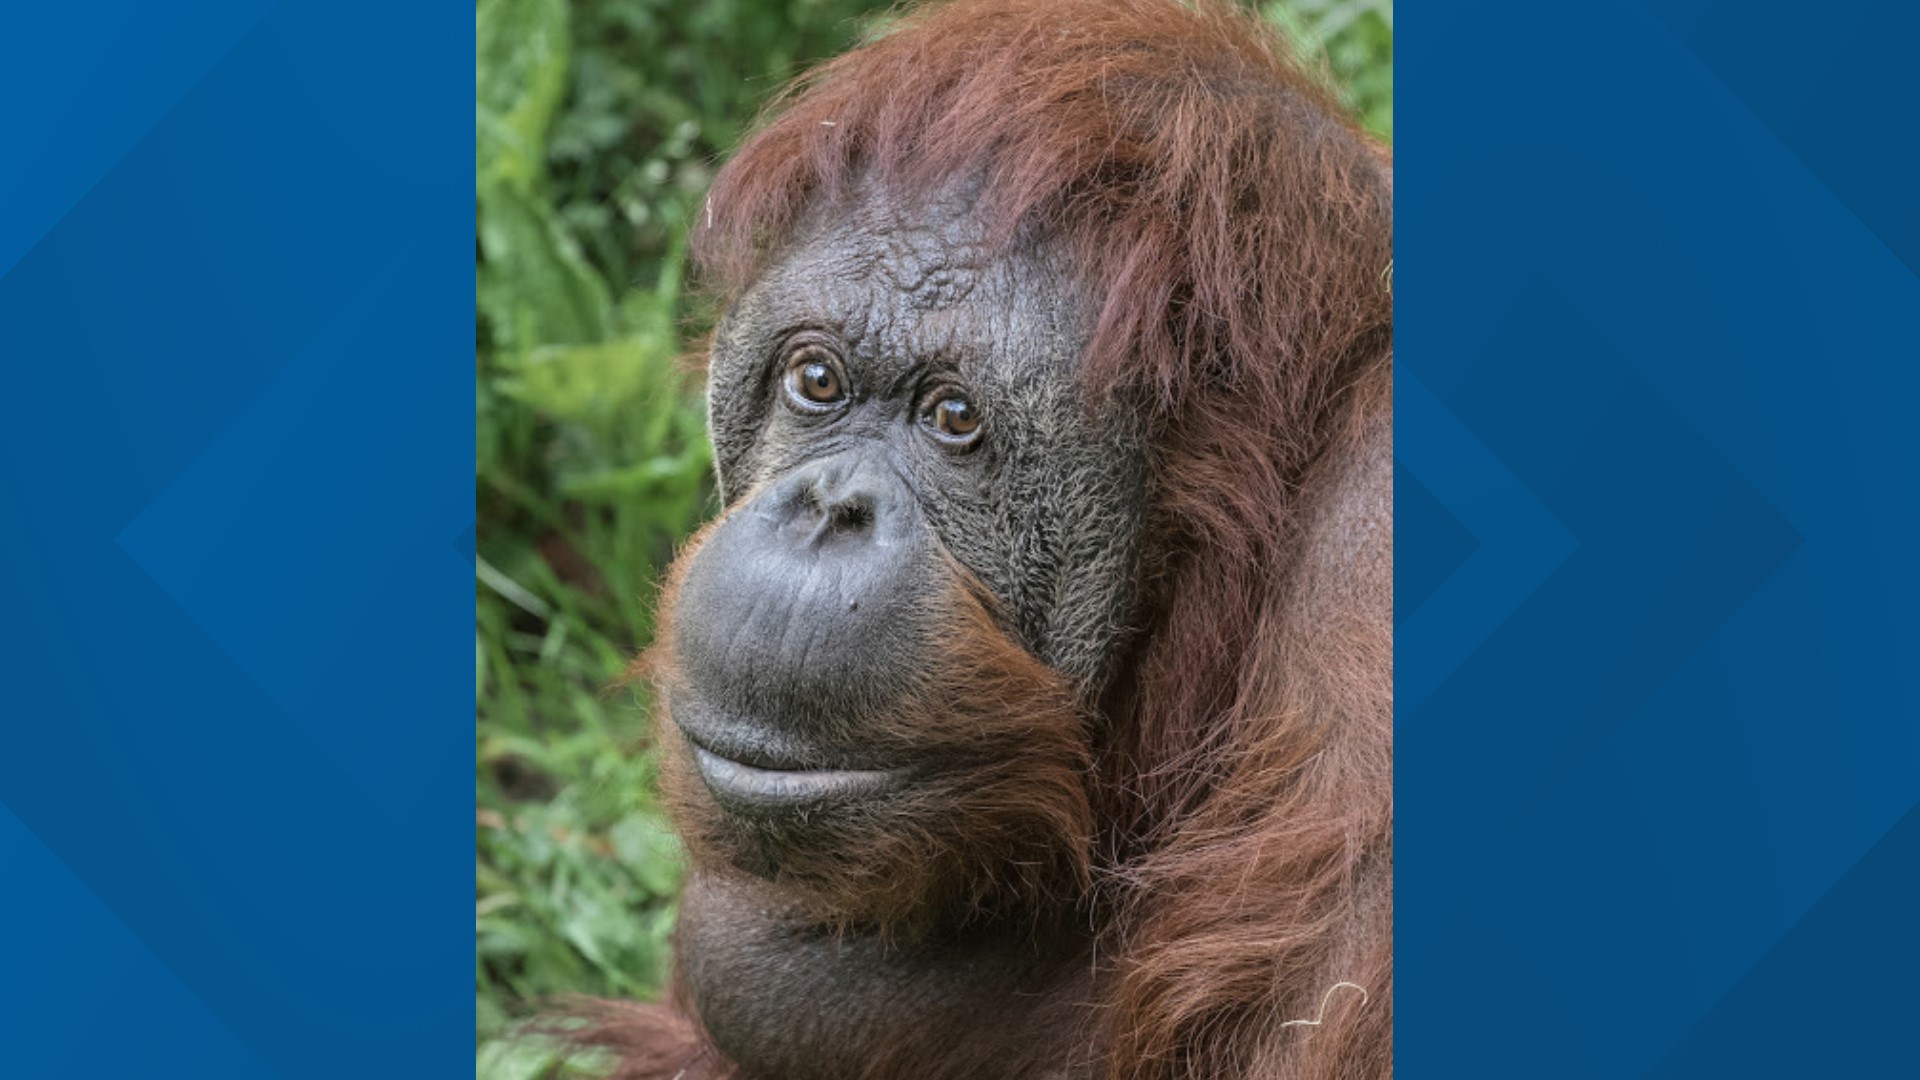 Chinta was just shy of her 52nd birthday. She was the oldest animal currently living at Woodland Park Zoo and one of the oldest orangutans in North America.